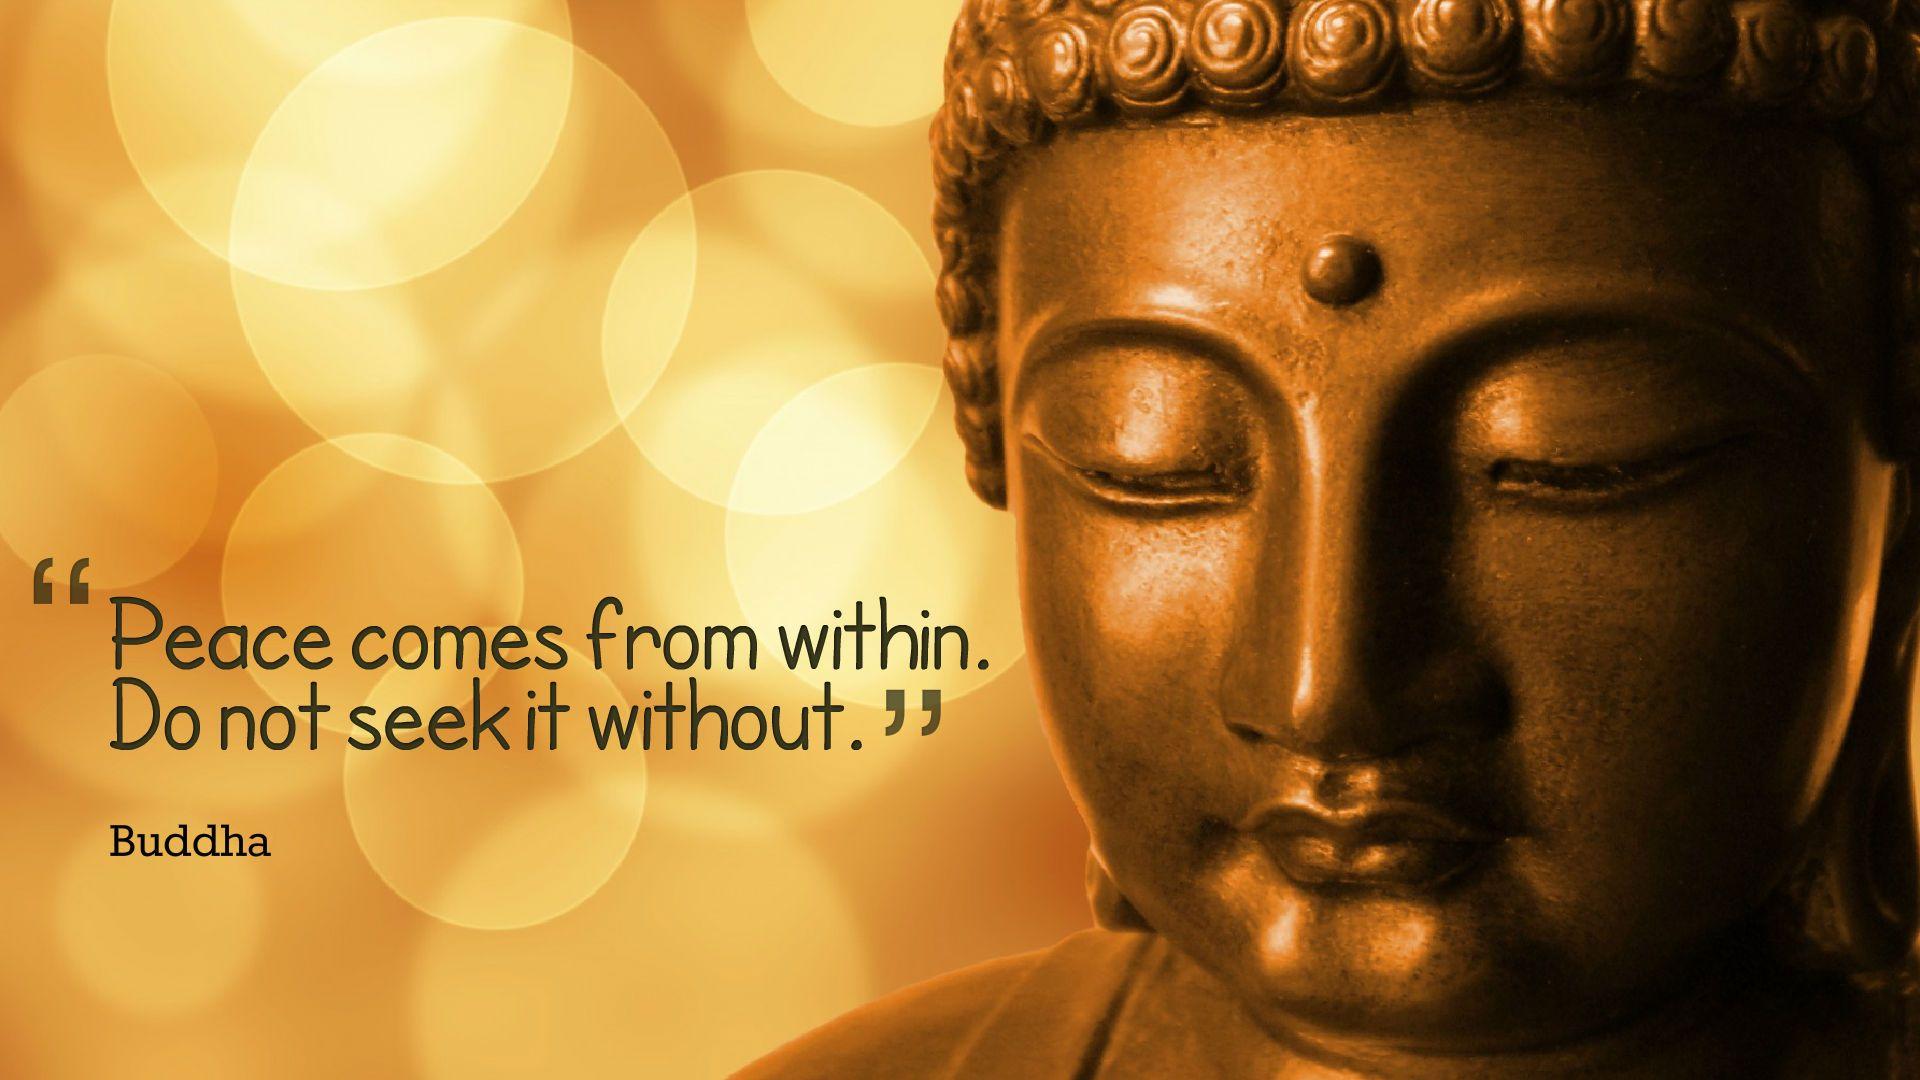 Buddha Quotes HD Wallpapers - Wallpaper Cave